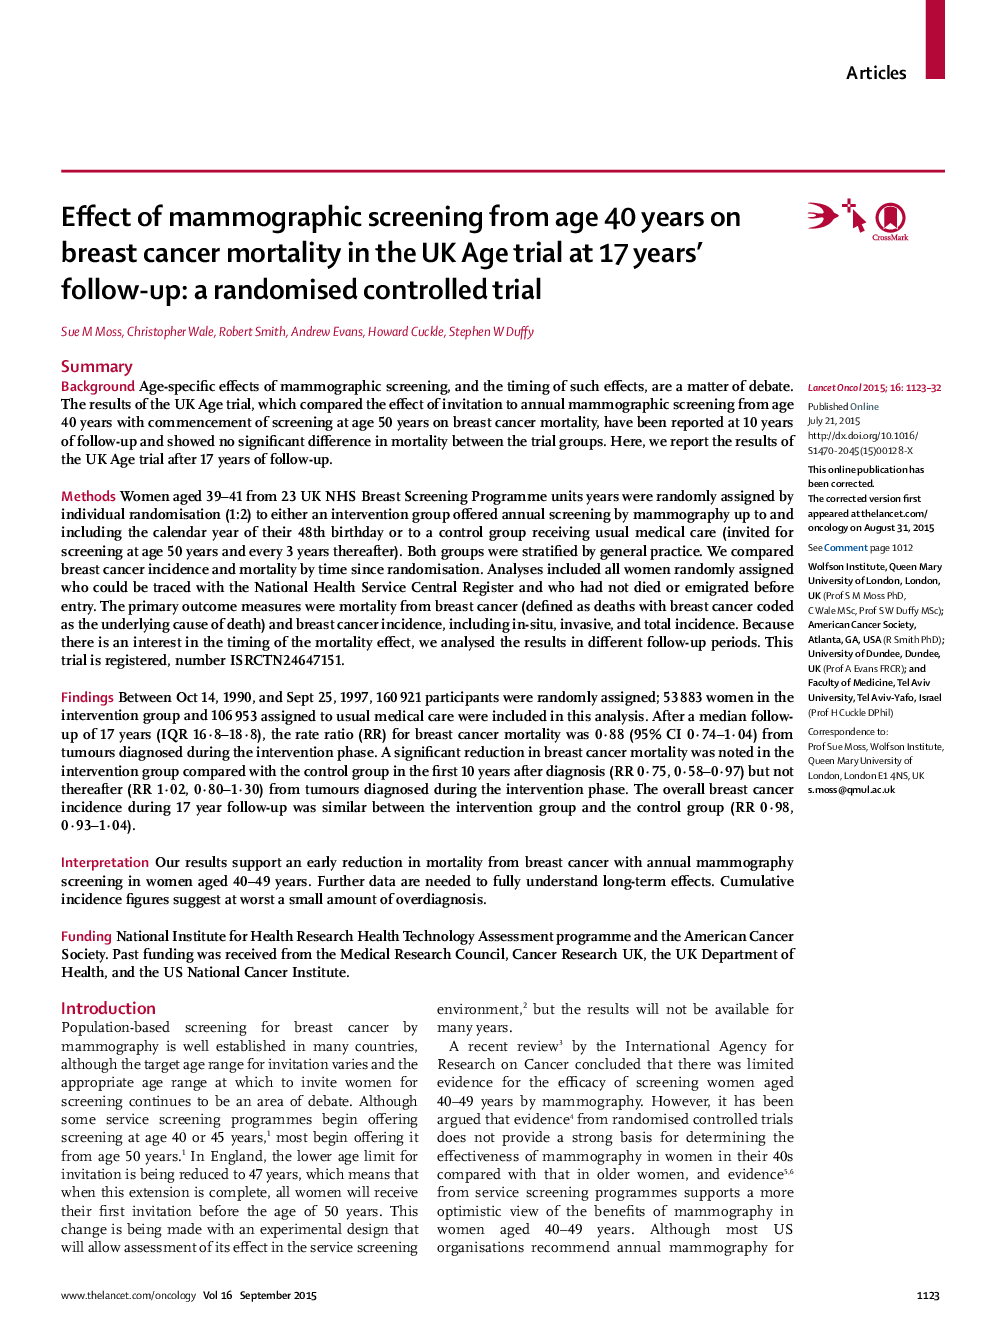 Effect of mammographic screening from age 40 years on breast cancer mortality in the UK Age trial at 17 years' follow-up: a randomised controlled trial